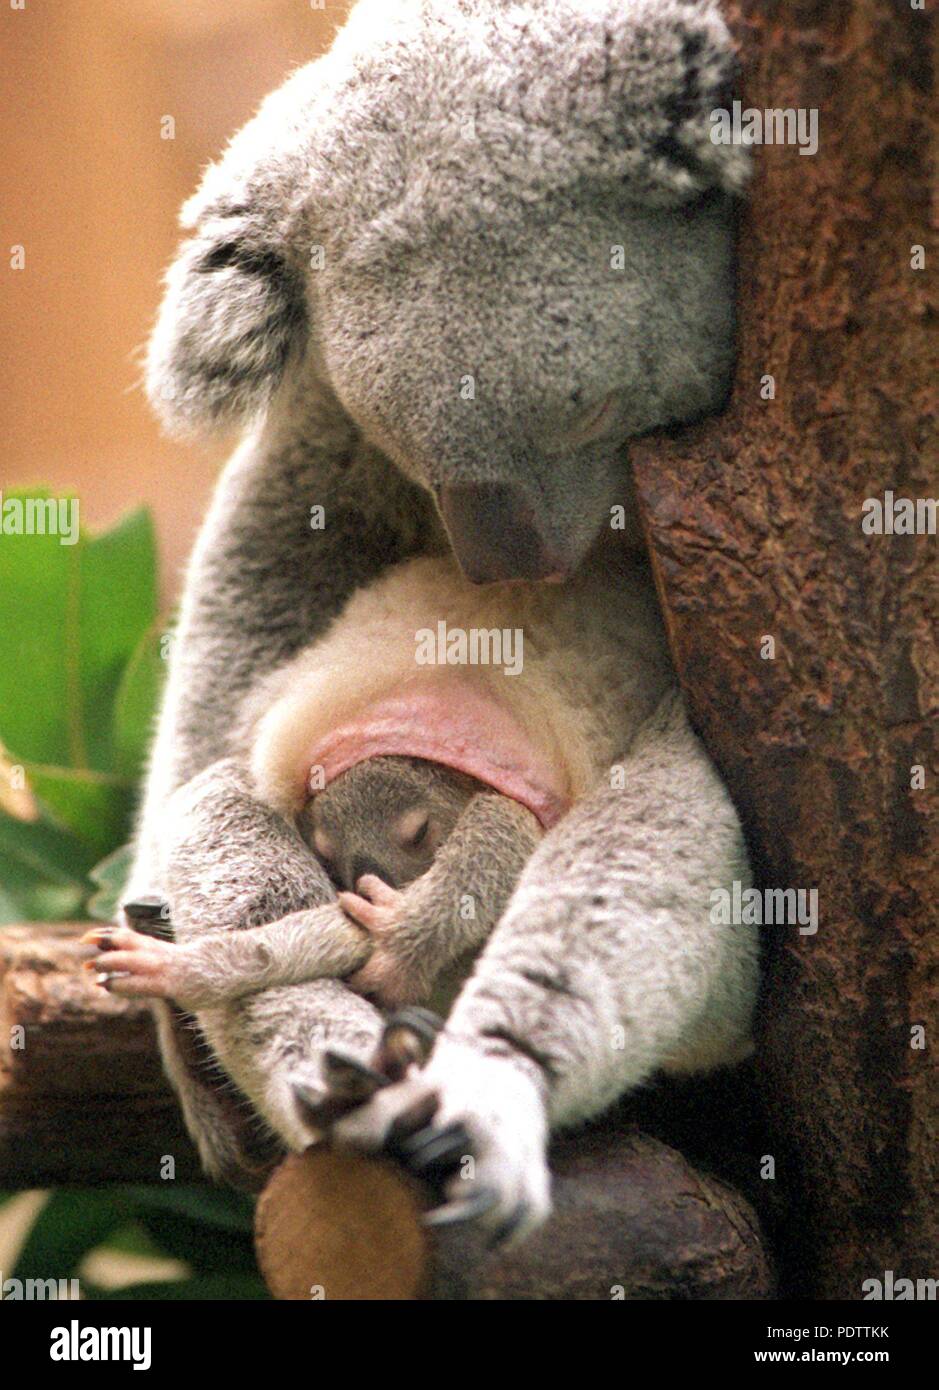 A baby koala in the pouch of its mother "Yuri" at Duisburg Zoo on 16 December 1998. | usage worldwide Stock Photo